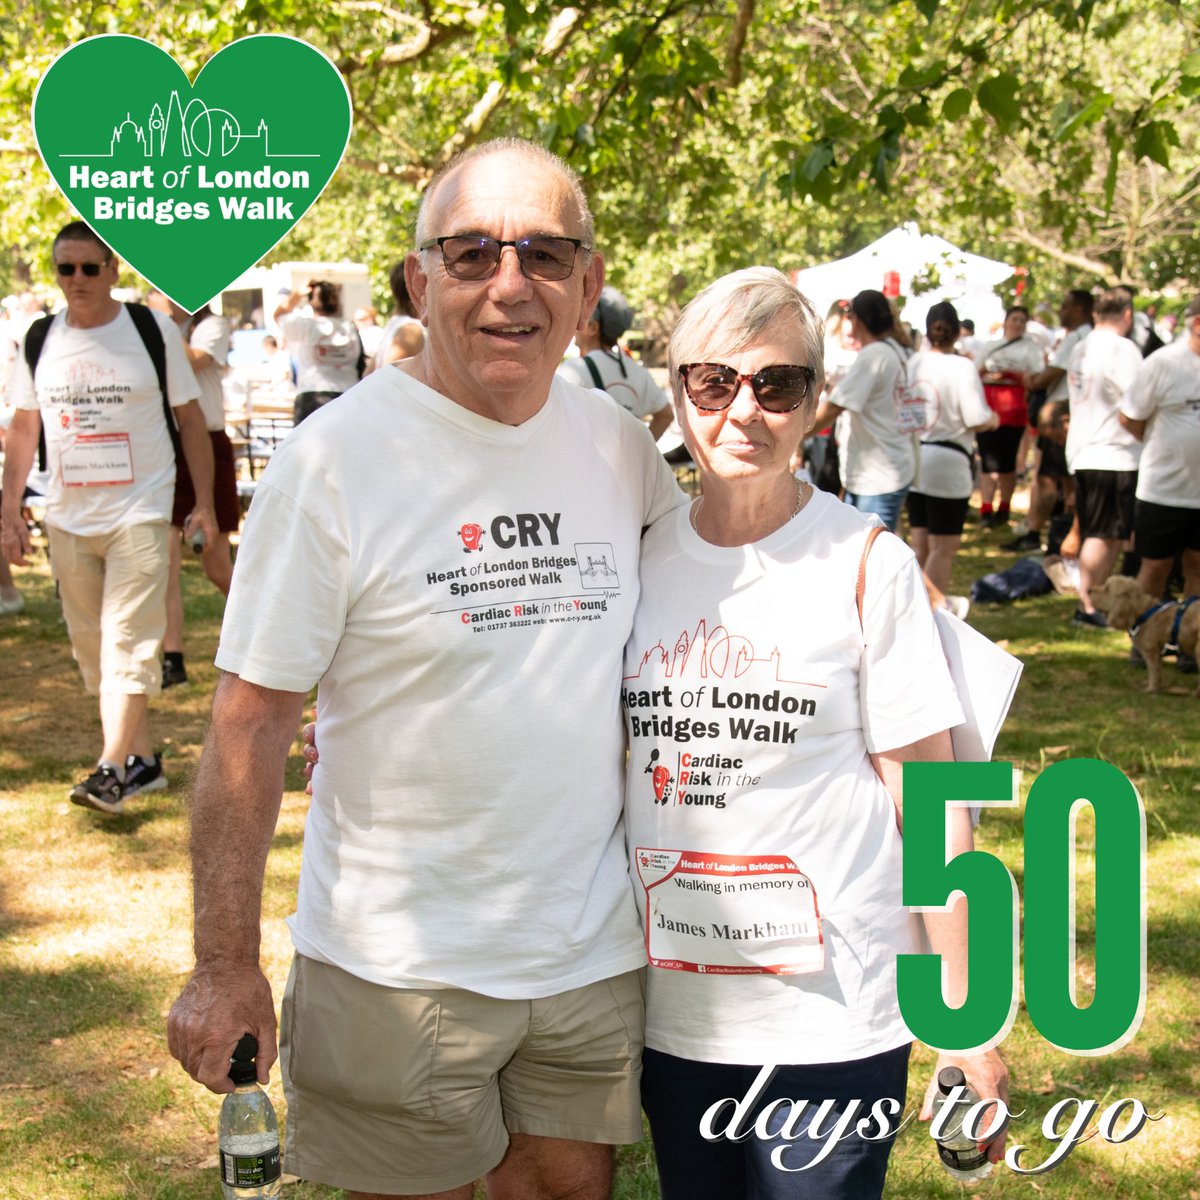 Only 50 days to go! There is not long left to register for the CRY Heart of London Bridges Walk. If you would like to join us in Southwark Park on 23rd June for a chance to connect and remember, register here: c-r-y.org.uk/heart-of-londo…